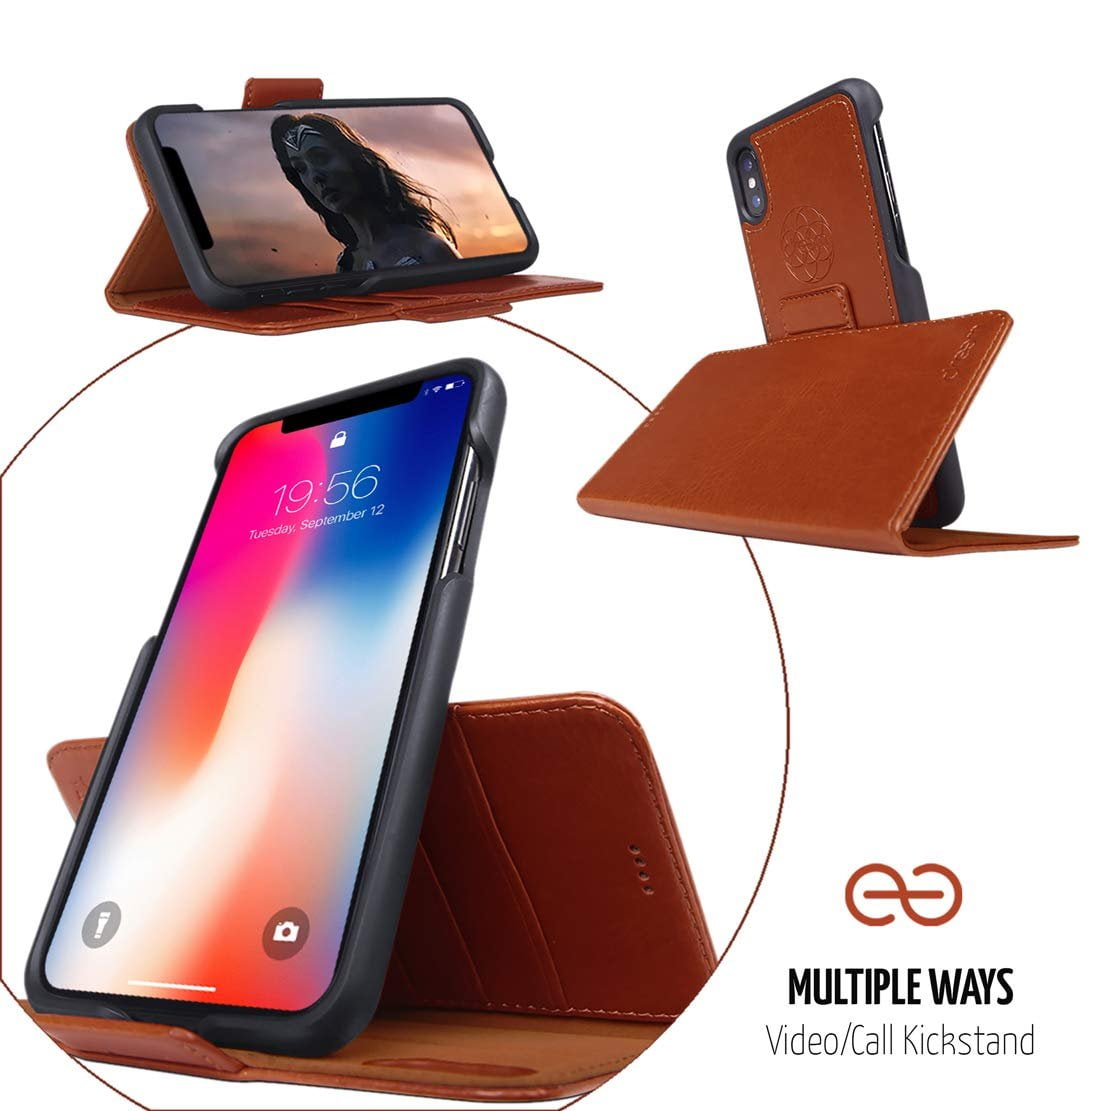 RFID Protection Dreem Fibonacci 2-in-1 Wallet-Case for iPhone X & Xs Luxury Vegan Leather Caramel Wireless Charging OK Magnetic Detachable Shock-Proof TPU Slim-Case Gift-Box 2-Way Stand